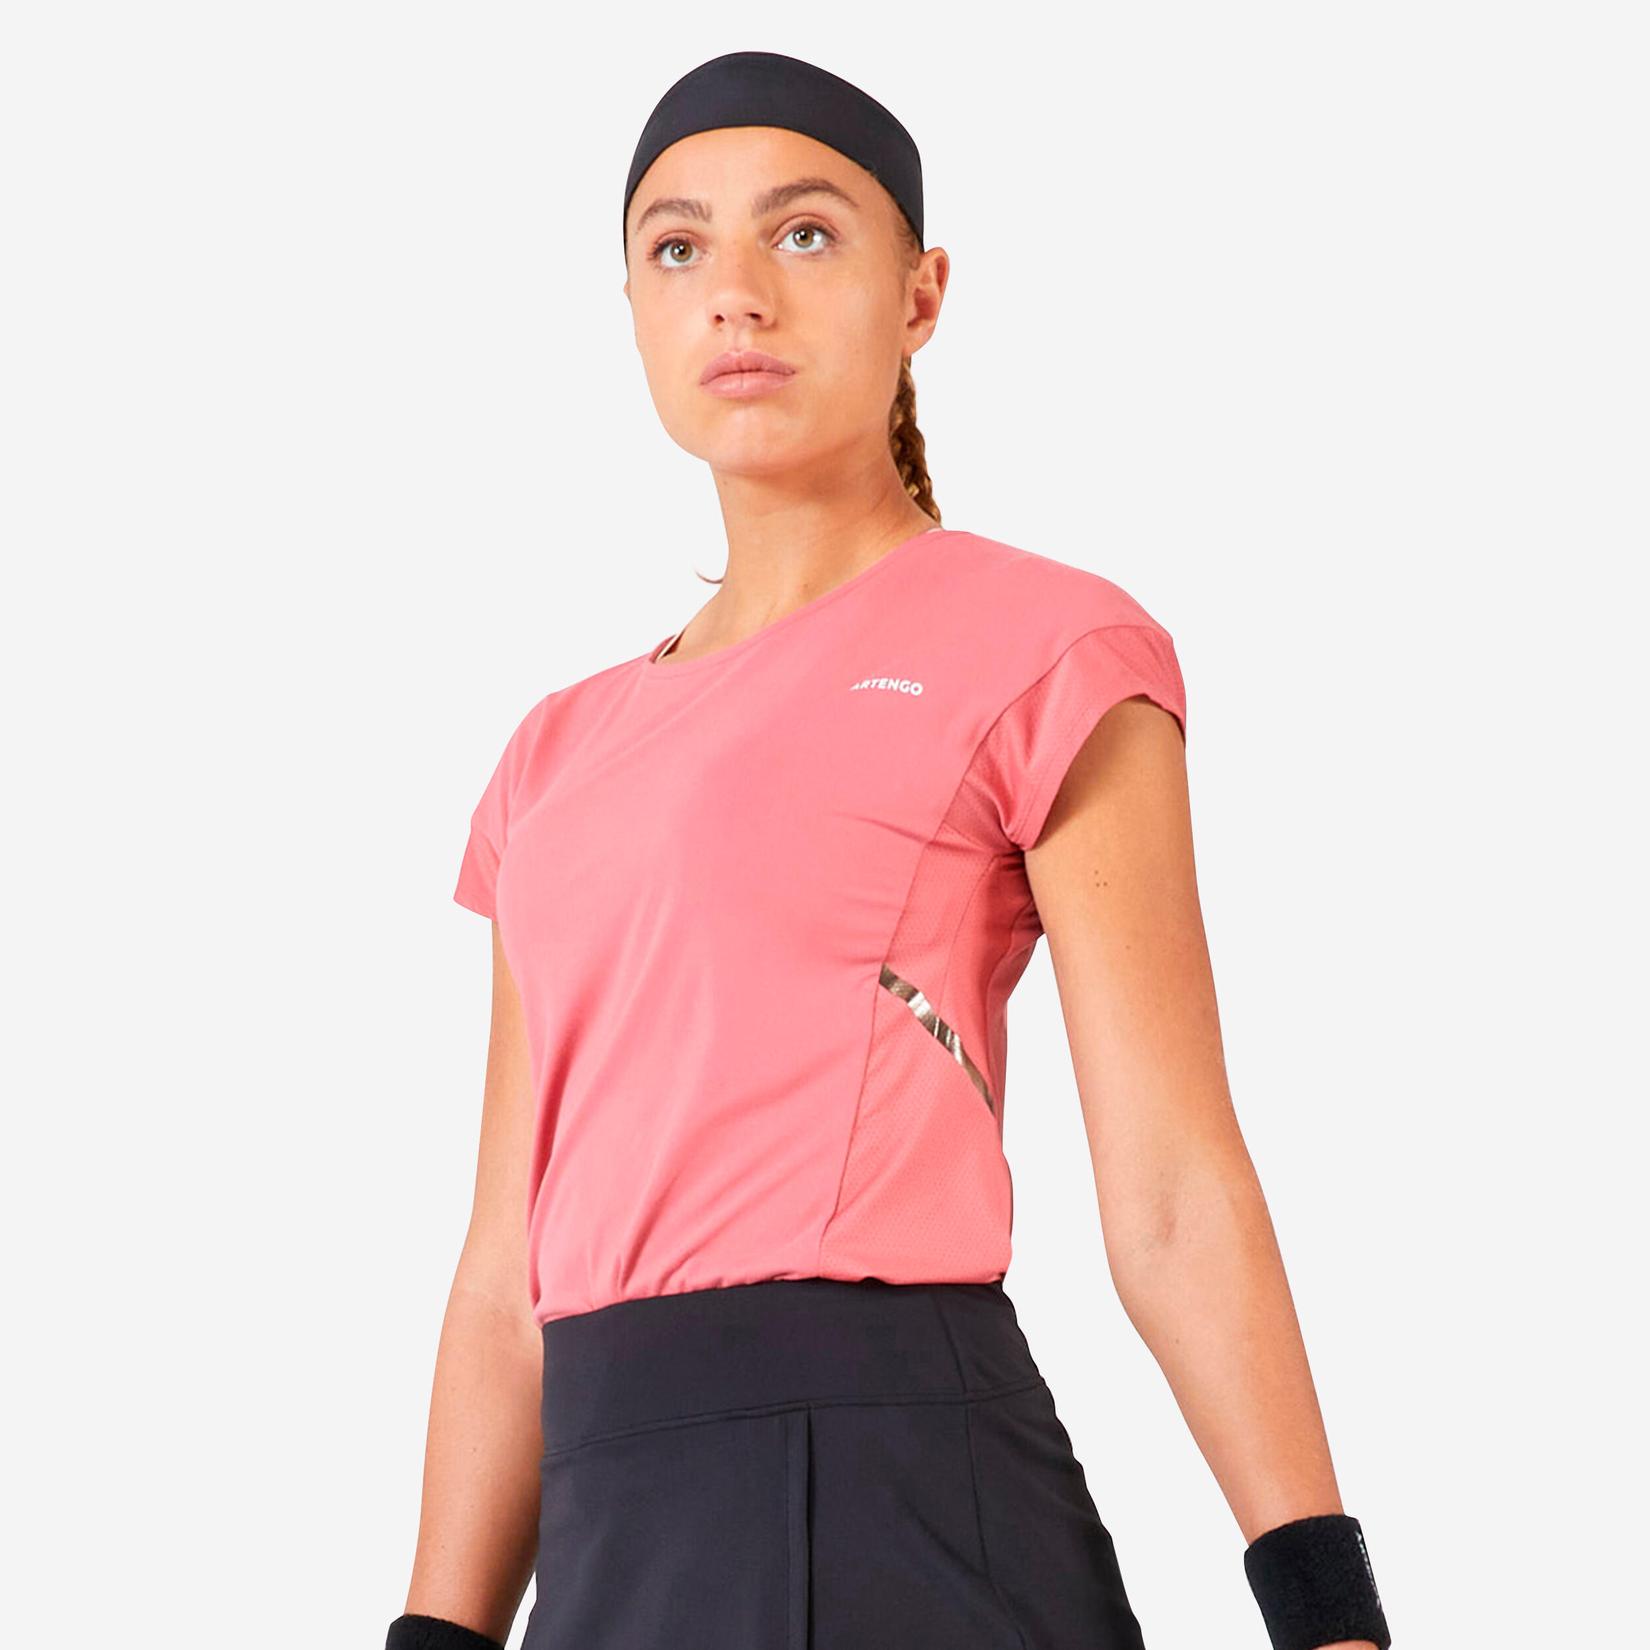 Women's Dry Crew Neck Soft Tennis T-Shirt Dry 500 - Blue/Black offers at R 299 in Decathlon